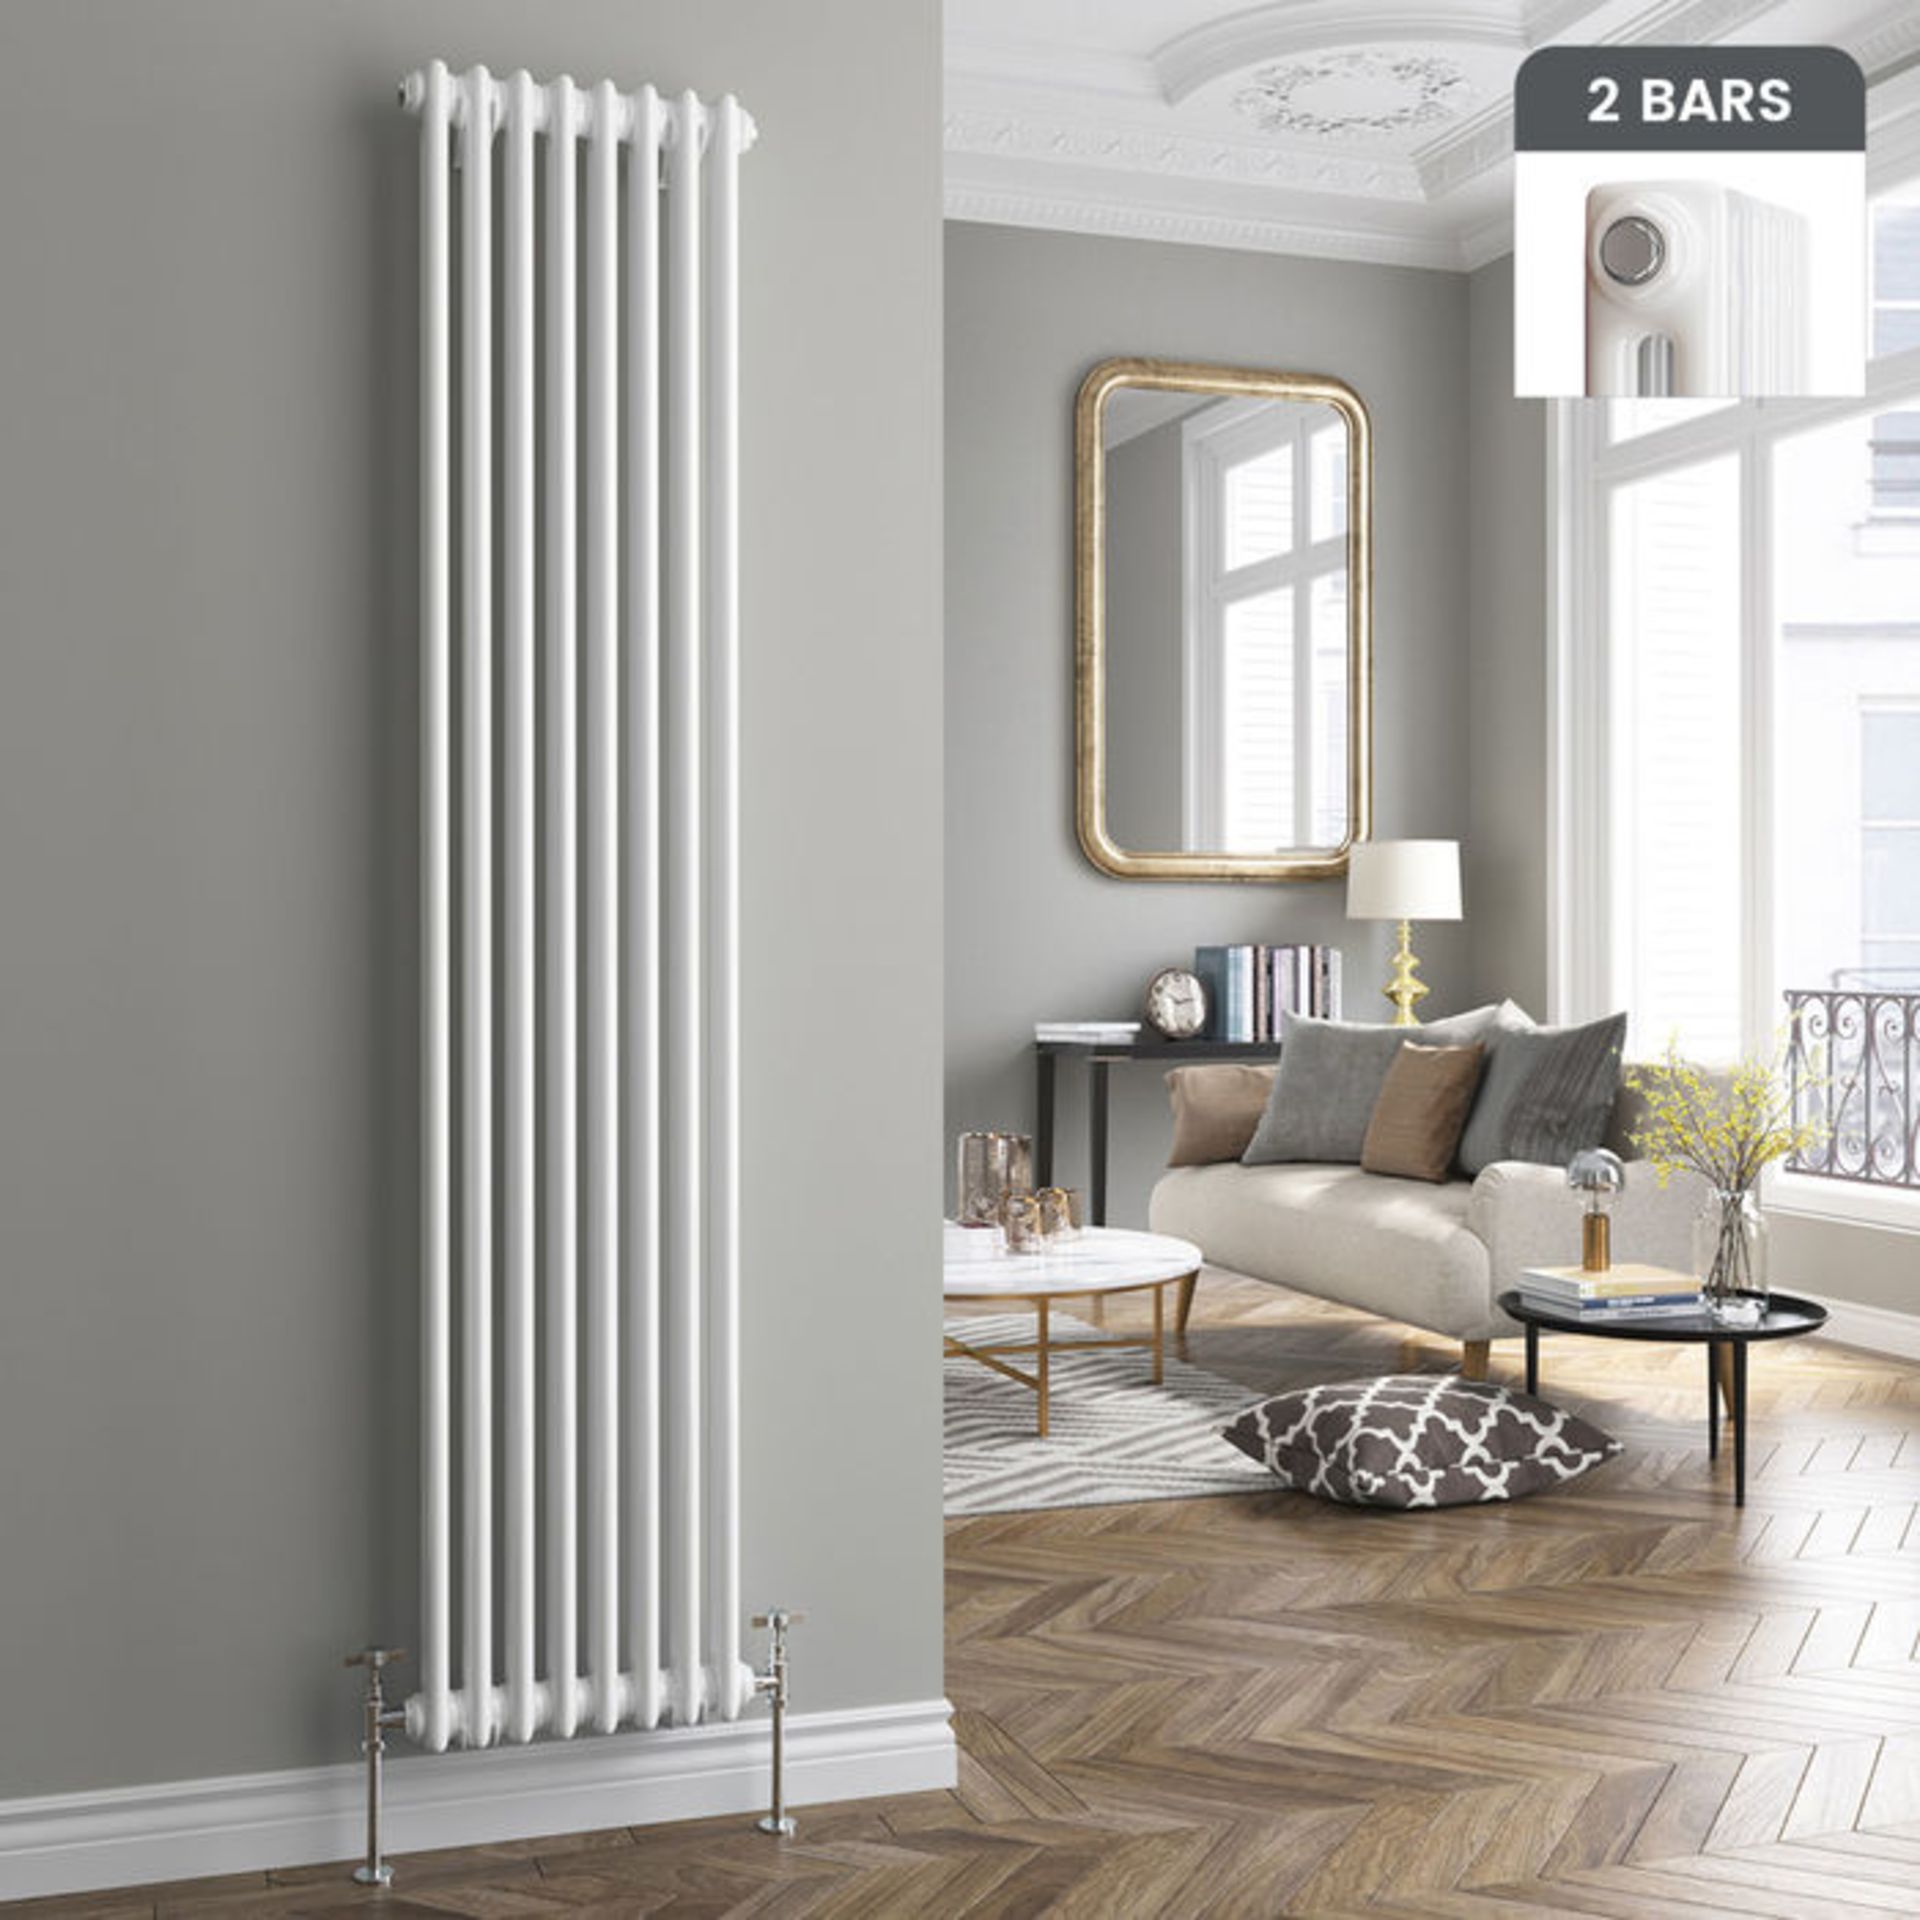 (HS70) 1800x380mm White Double Panel Vertical Colosseum Traditional Radiator. RRP £369.99. Made from